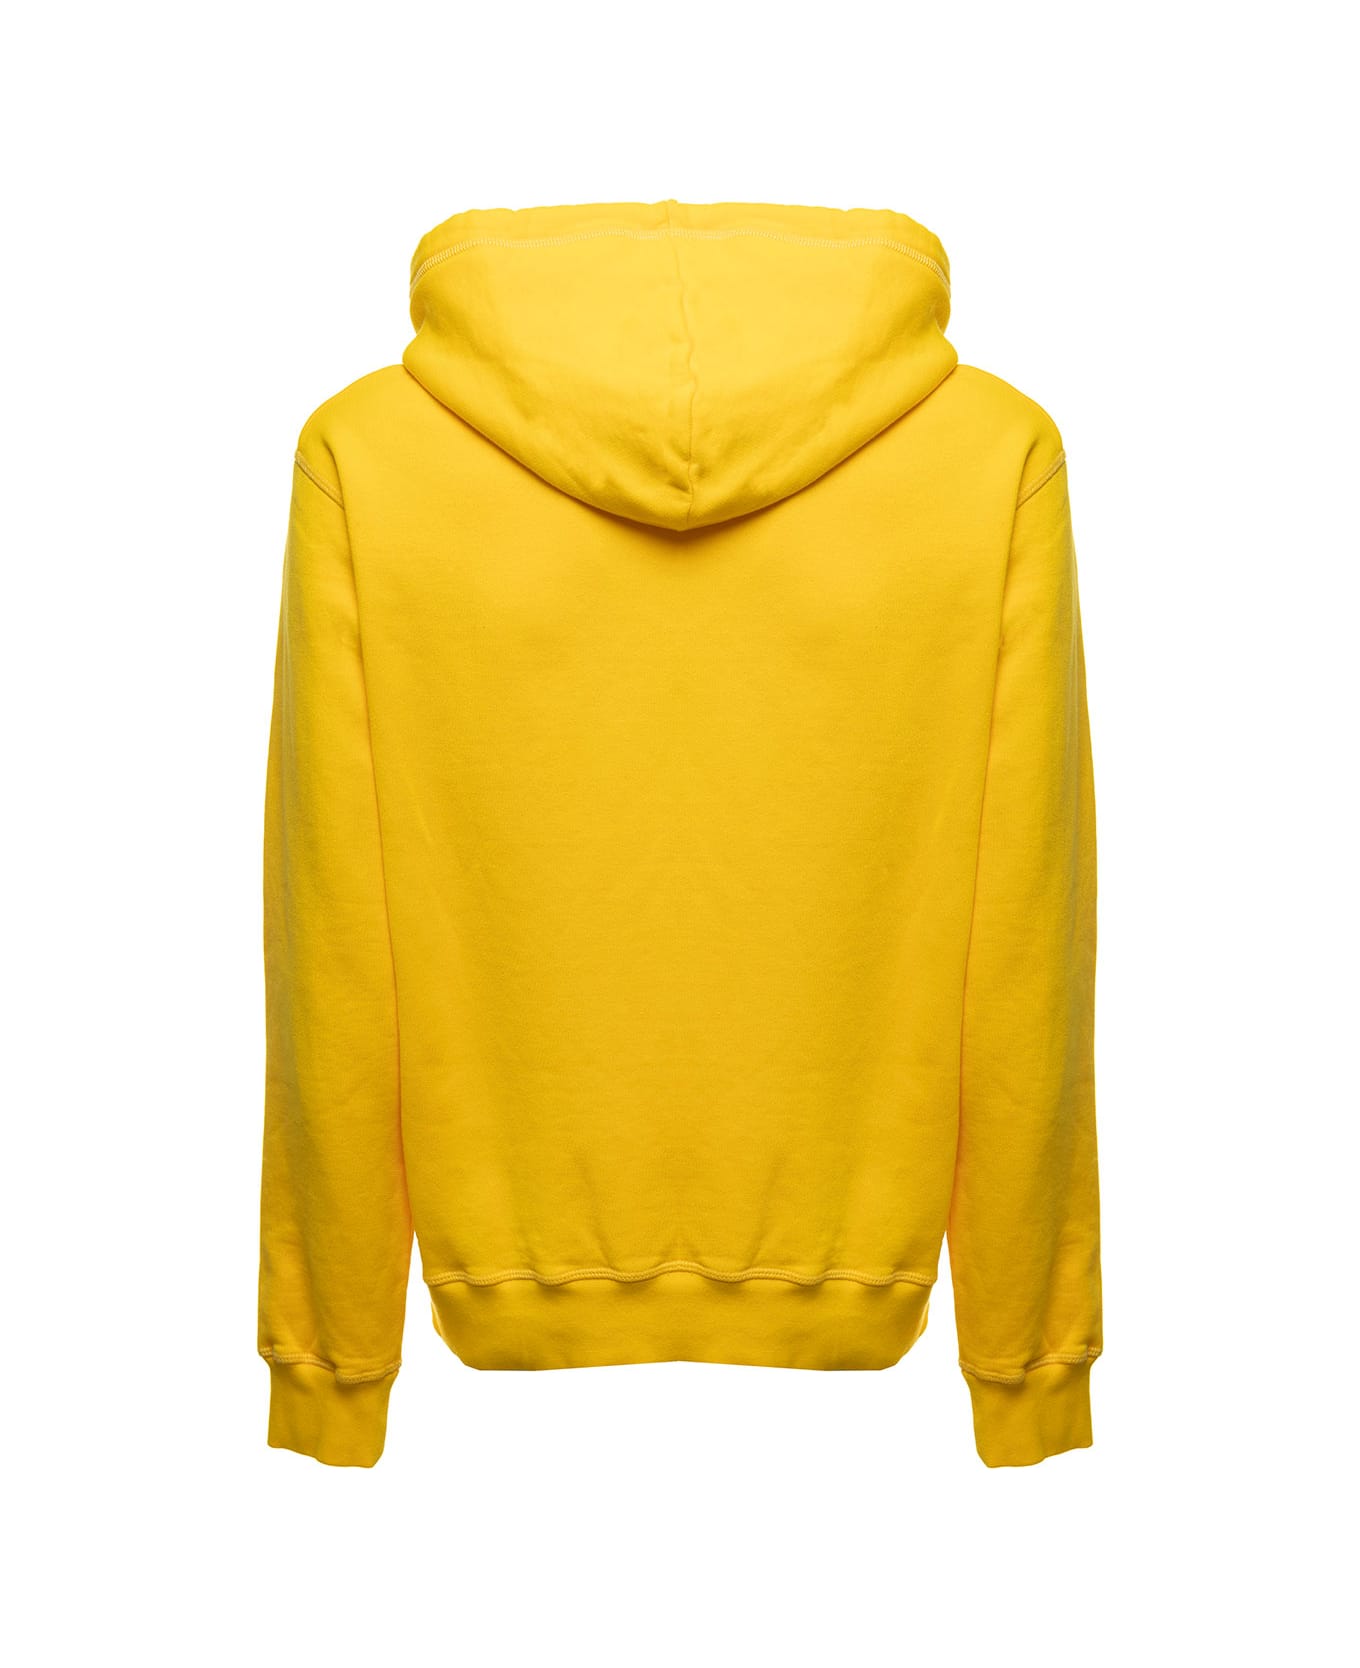 Dsquared2 Yellow Jersey Hoodie Invicta X D-squared2 Man - YELLOW